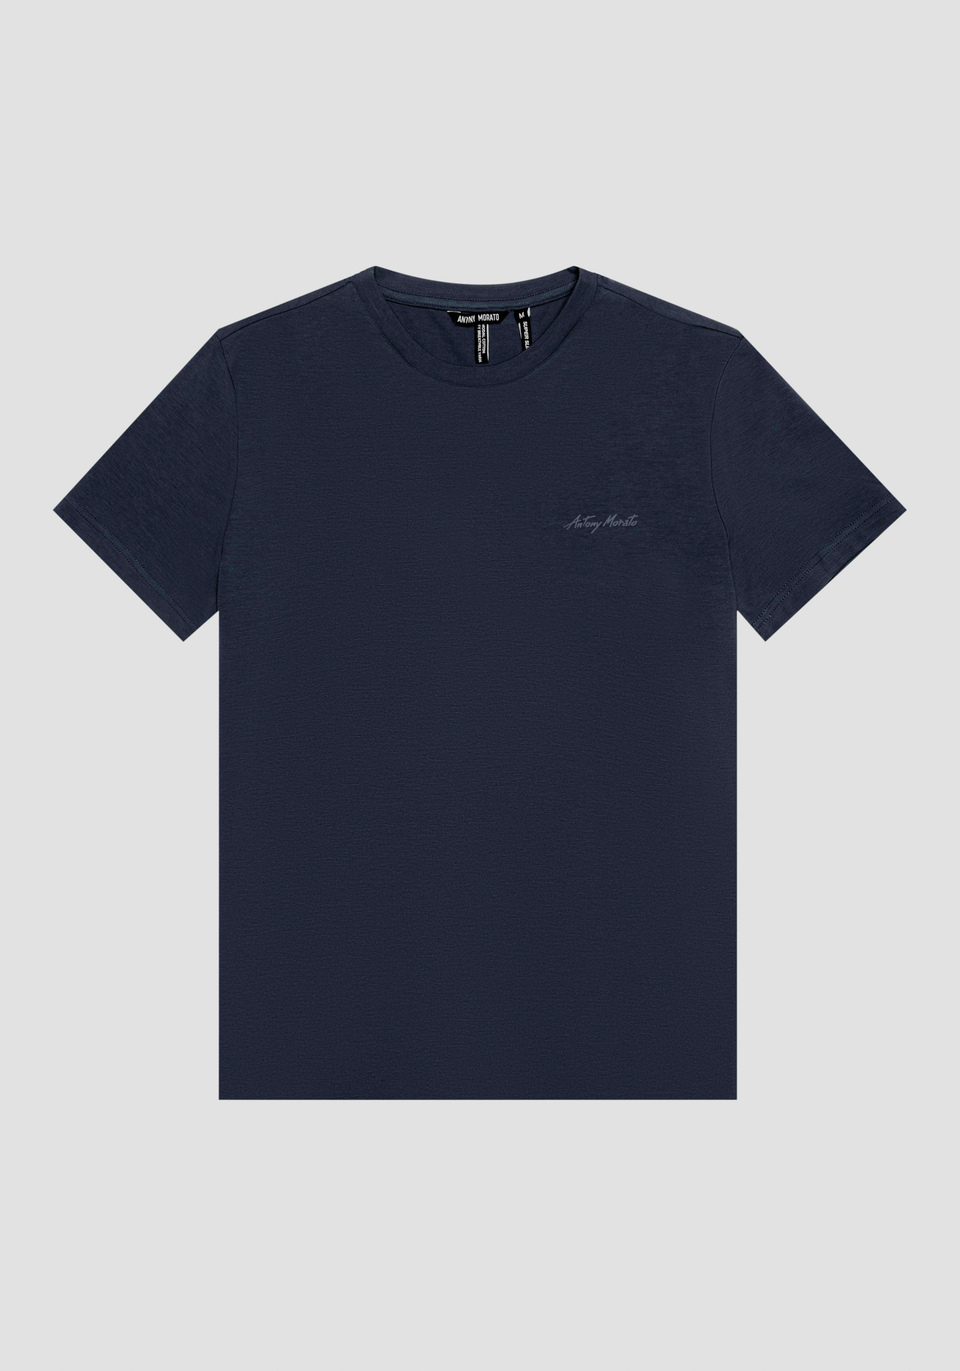 SUPER SLIM FIT T-SHIRT IN STRETCH COTTON WITH LEFT-HAND-SIDE LOGO - Antony Morato Online Shop